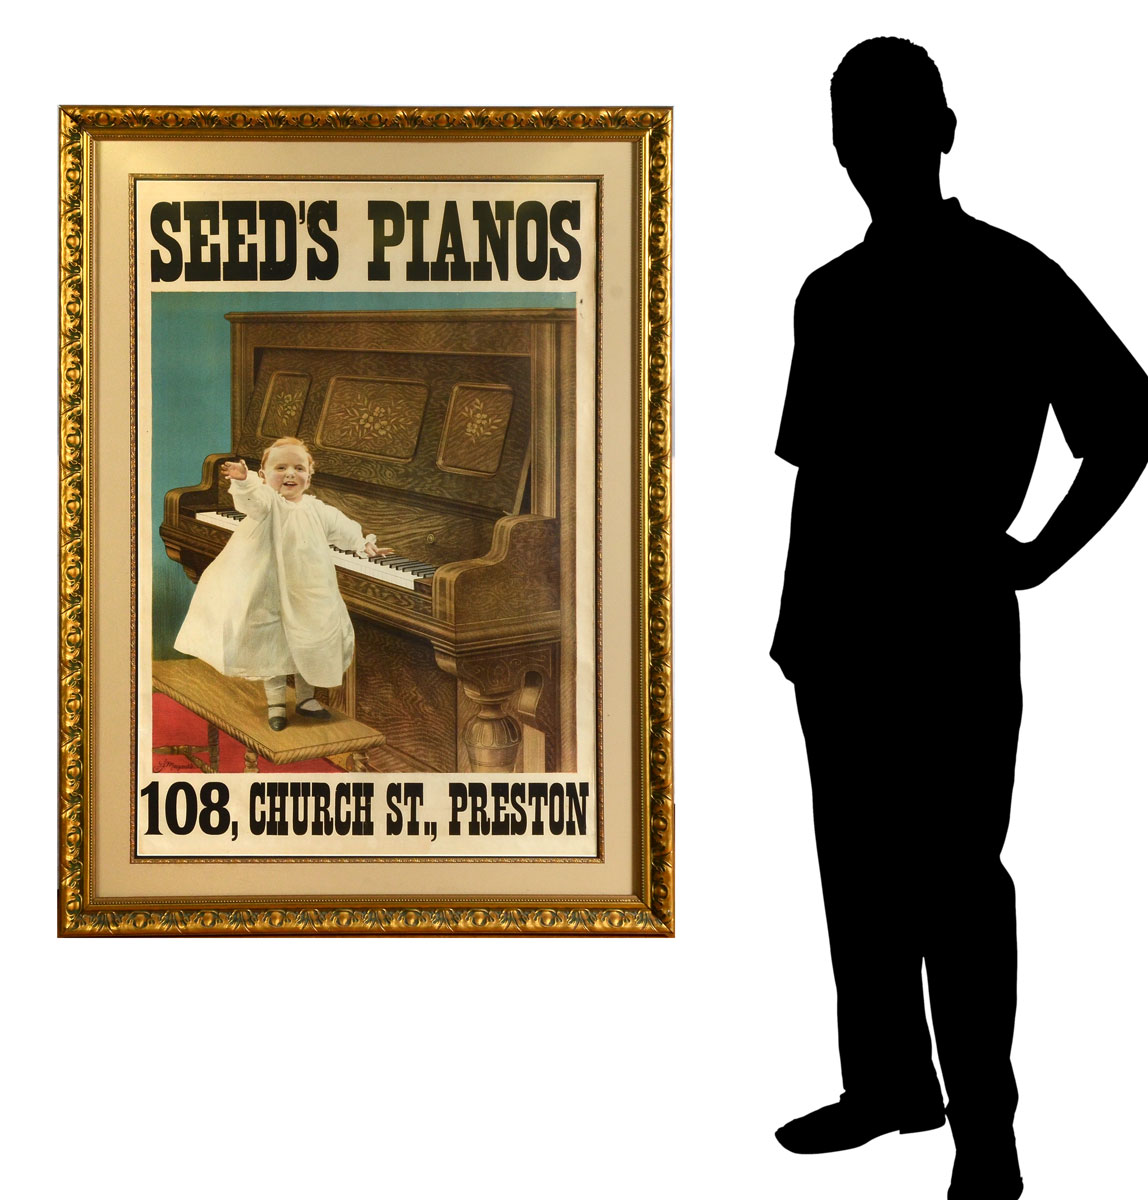 LARGE SEED'S PIANO LITHOGRAPH ADVERTISEMENT: